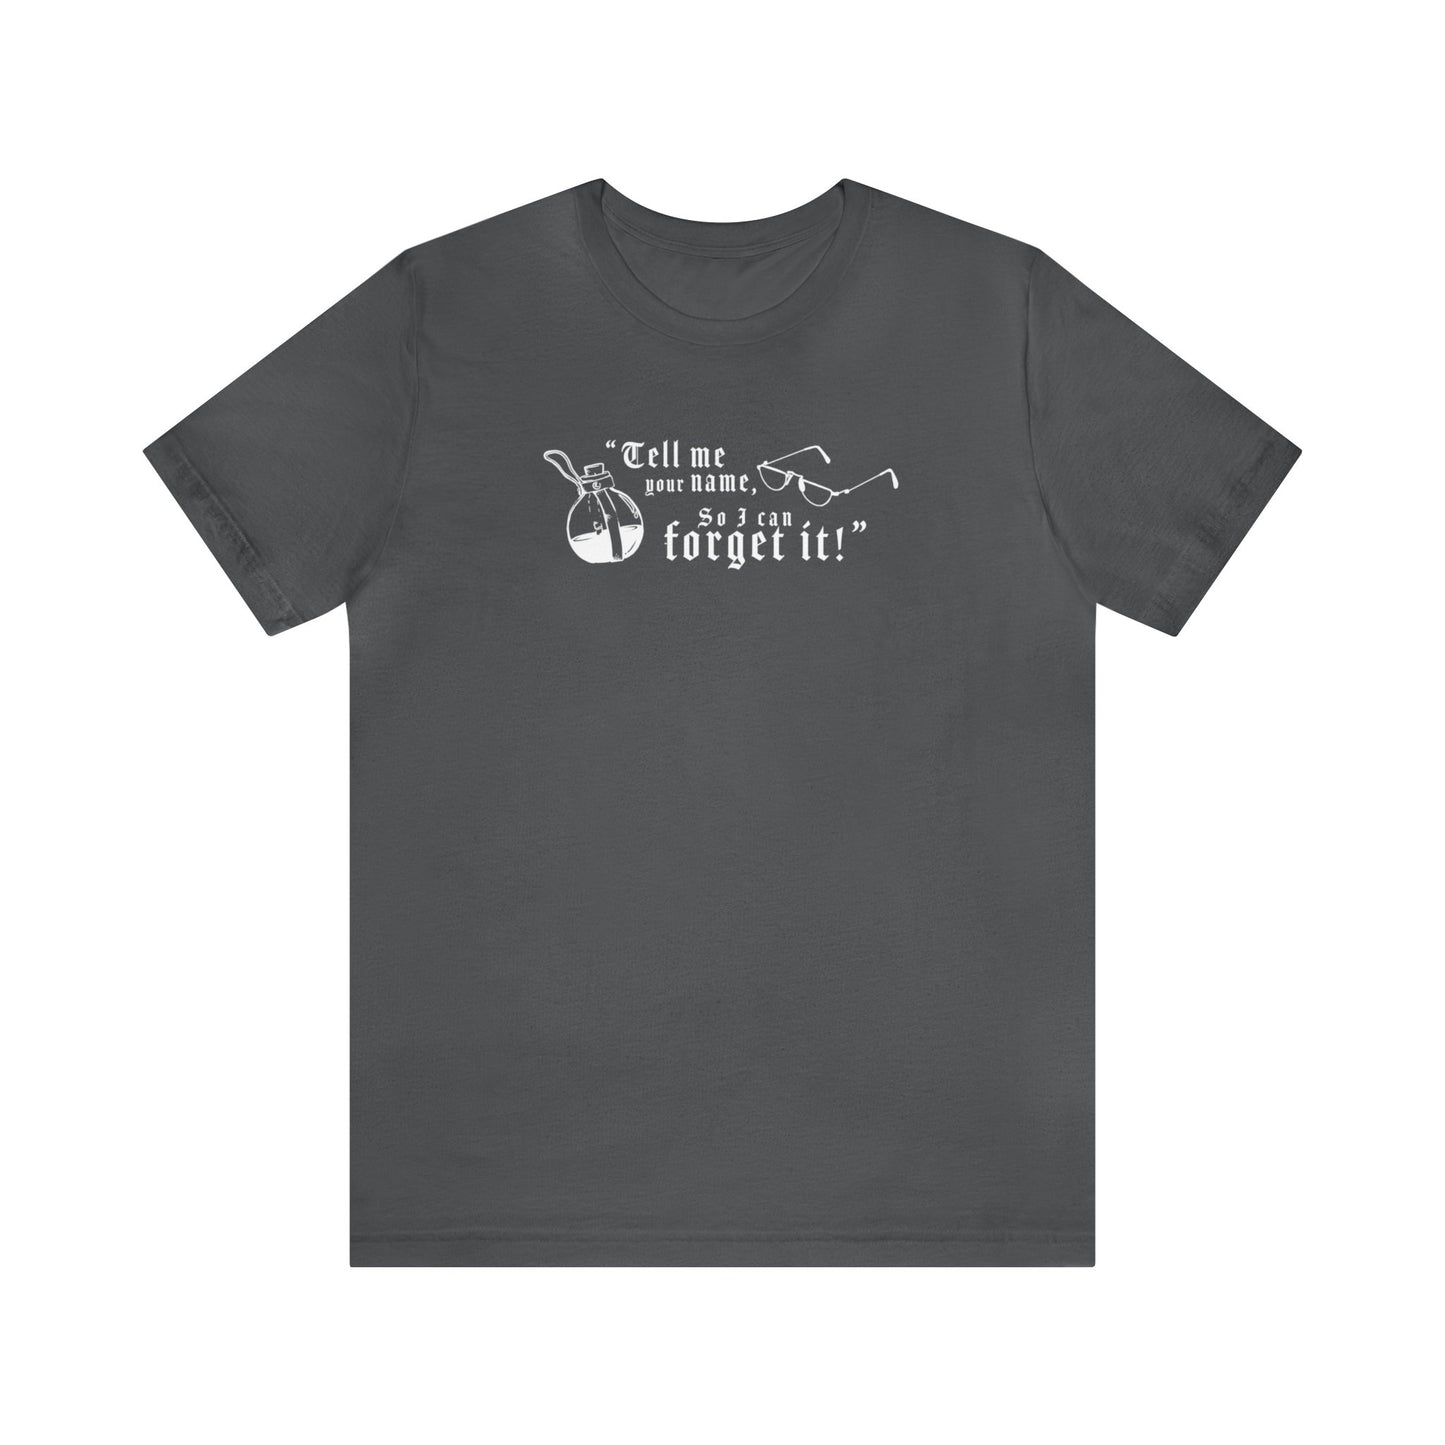 "Tell me your name" (Illustrated version) - Call to Quest T-Shirt